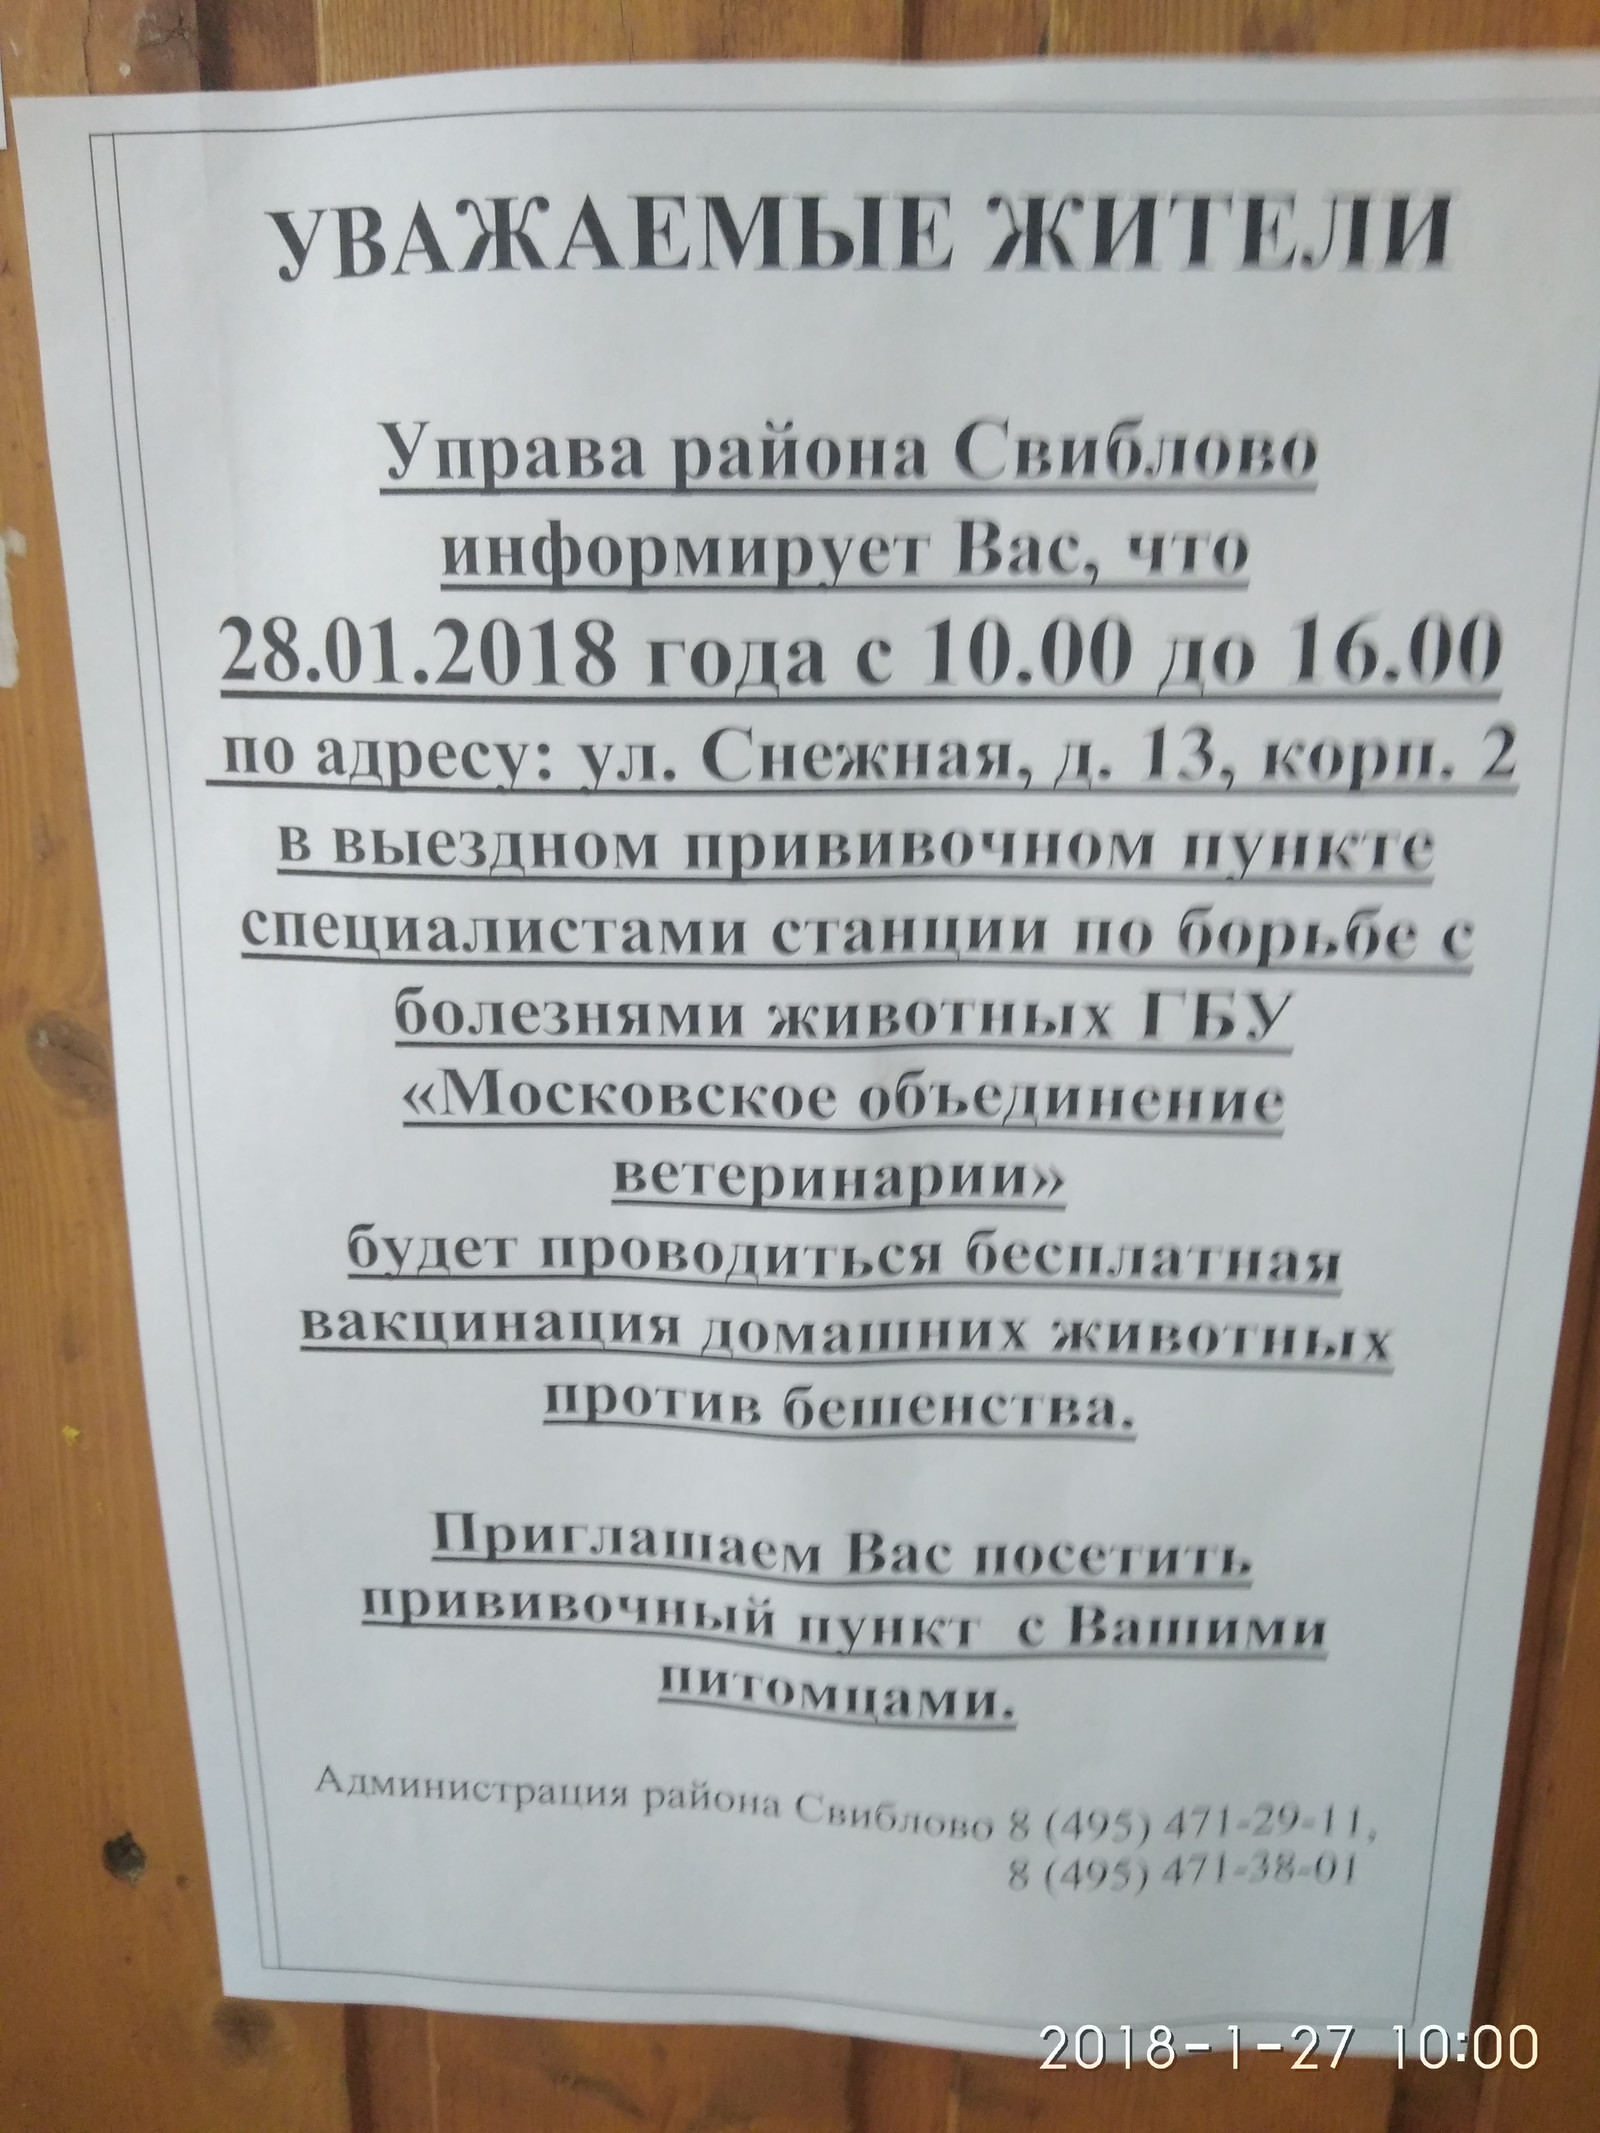 The authorities are trying to prevent the rallies!!!!!!! - My, Politics, Alexey Navalny, Strike, Humor